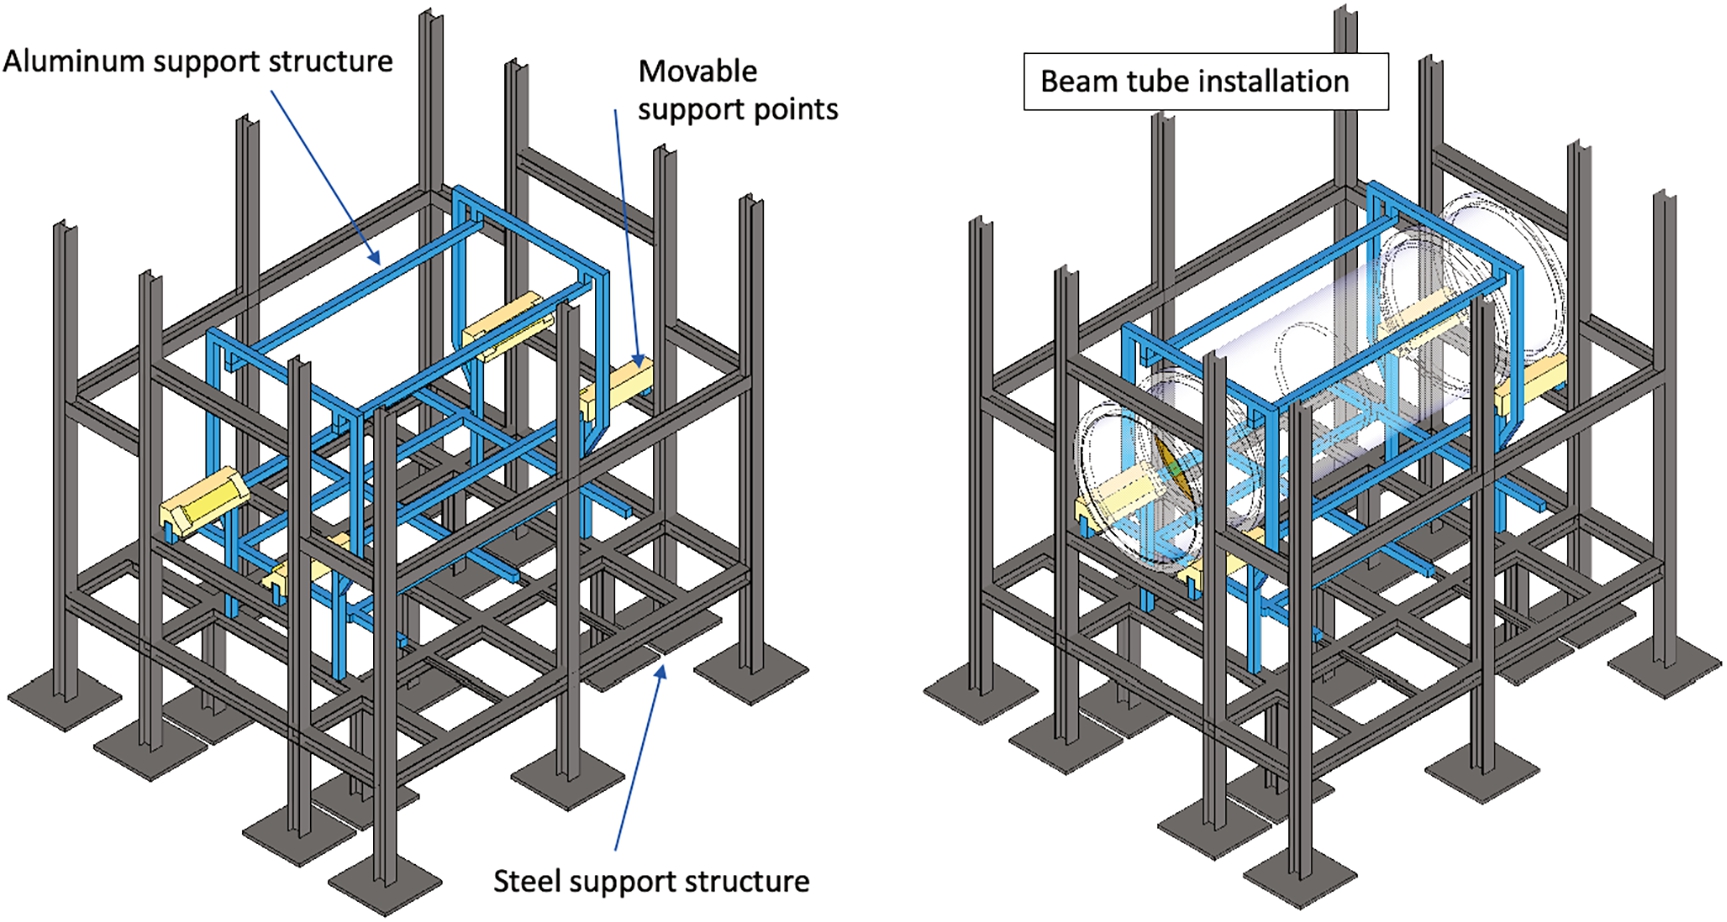 Left: the steel and aluminum NNBAR detector support structure with movable support points for installation of the central beam tube. Right: beam tube installation.